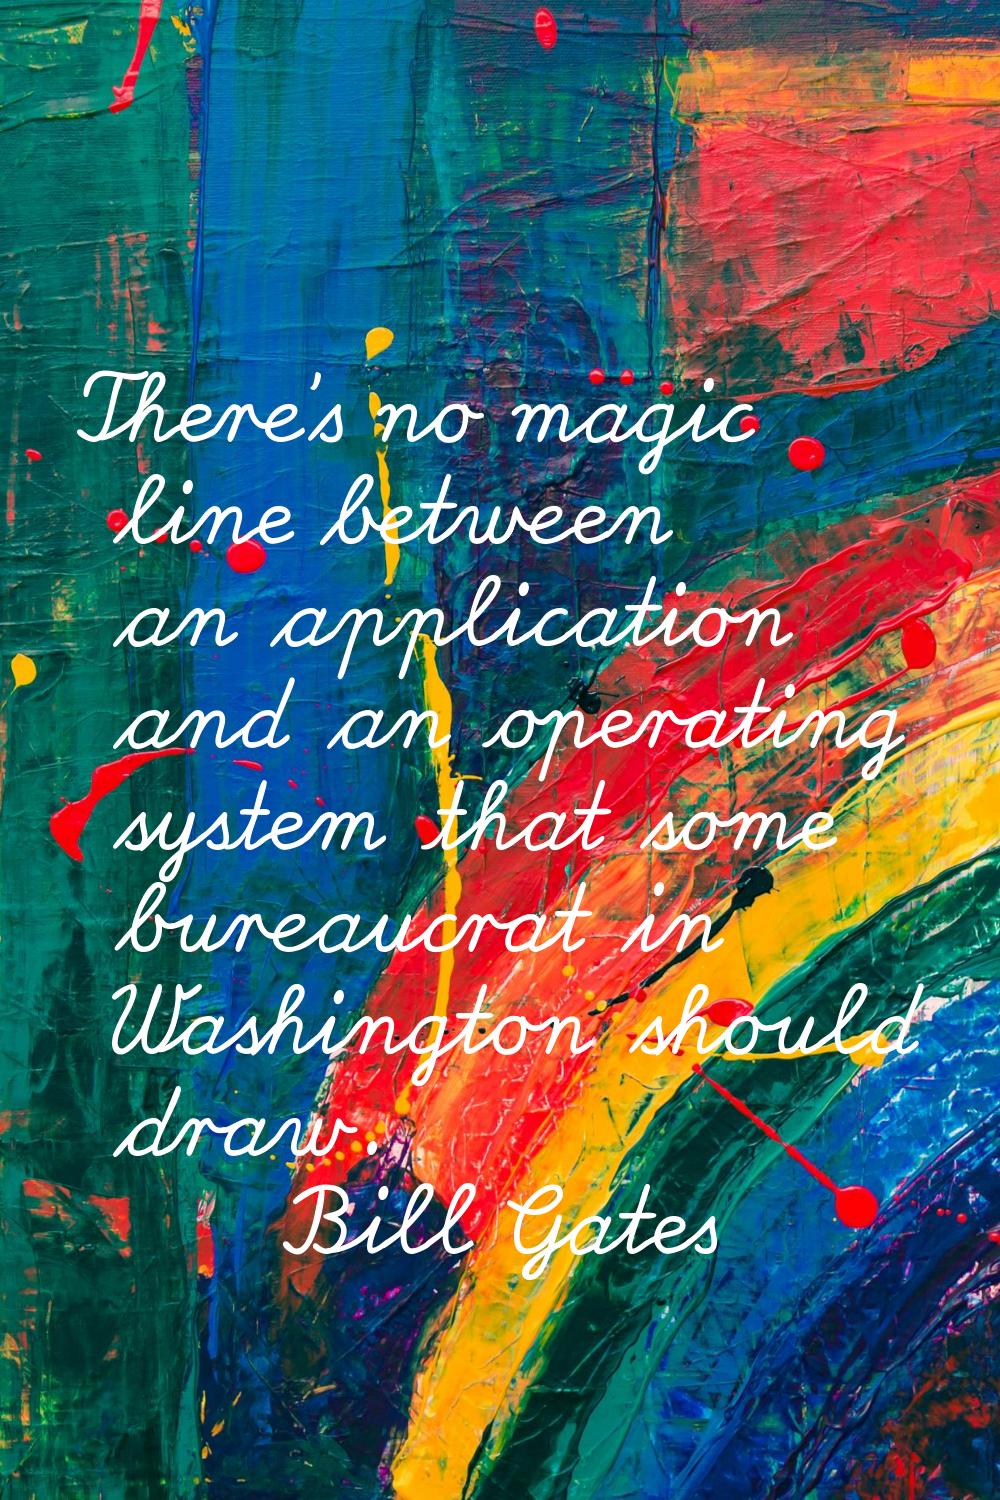 There's no magic line between an application and an operating system that some bureaucrat in Washin